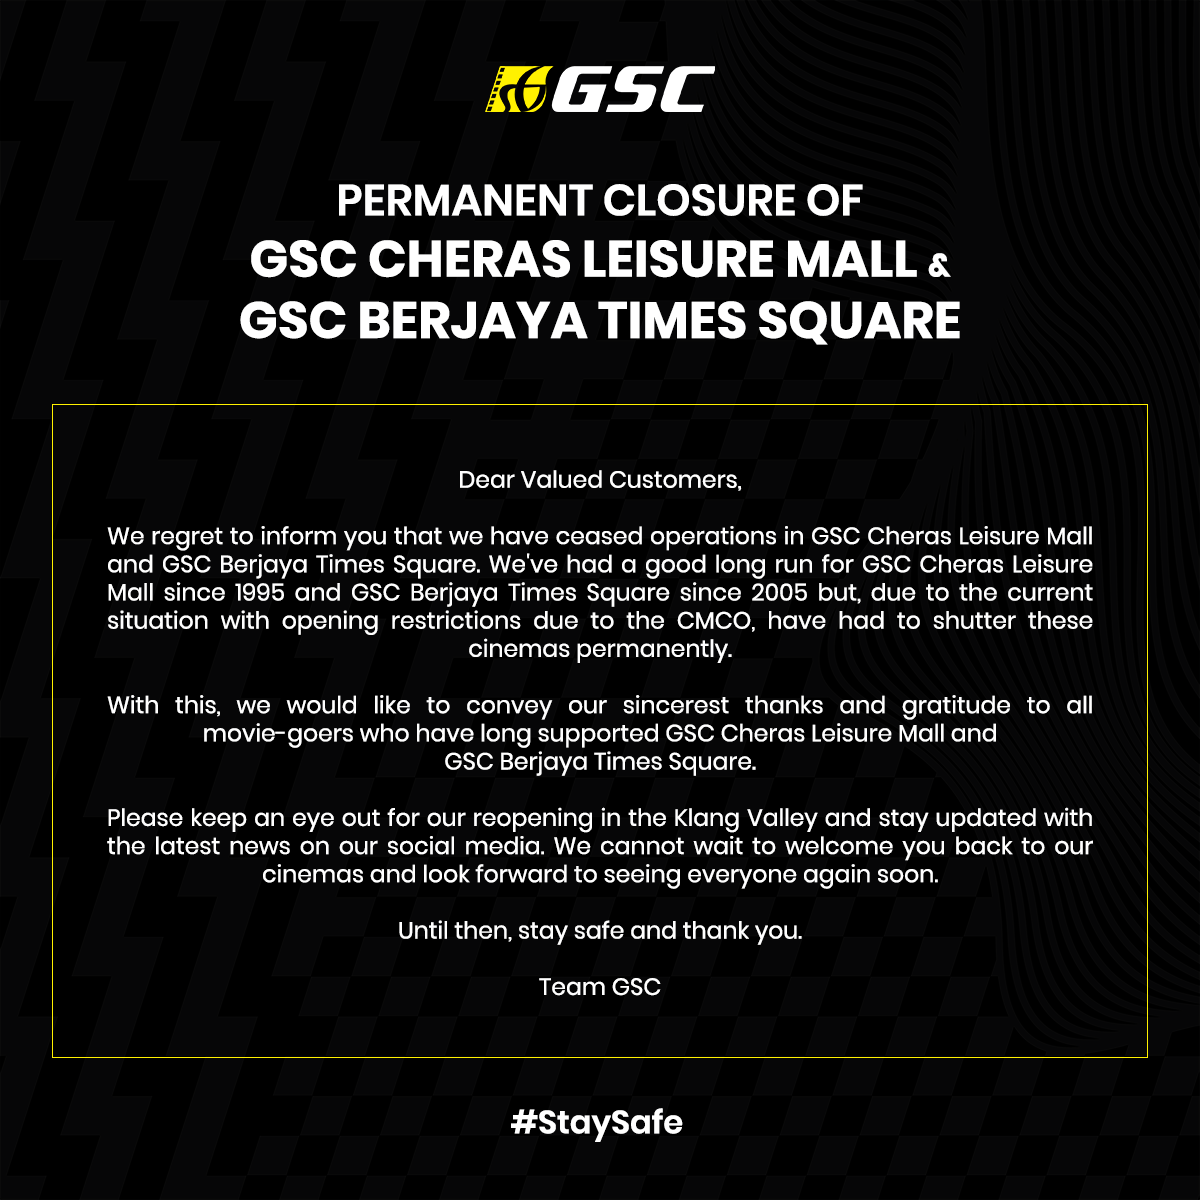 GSC Closing Outlets in Cheras Leisure Mall & Berjaya Times Square